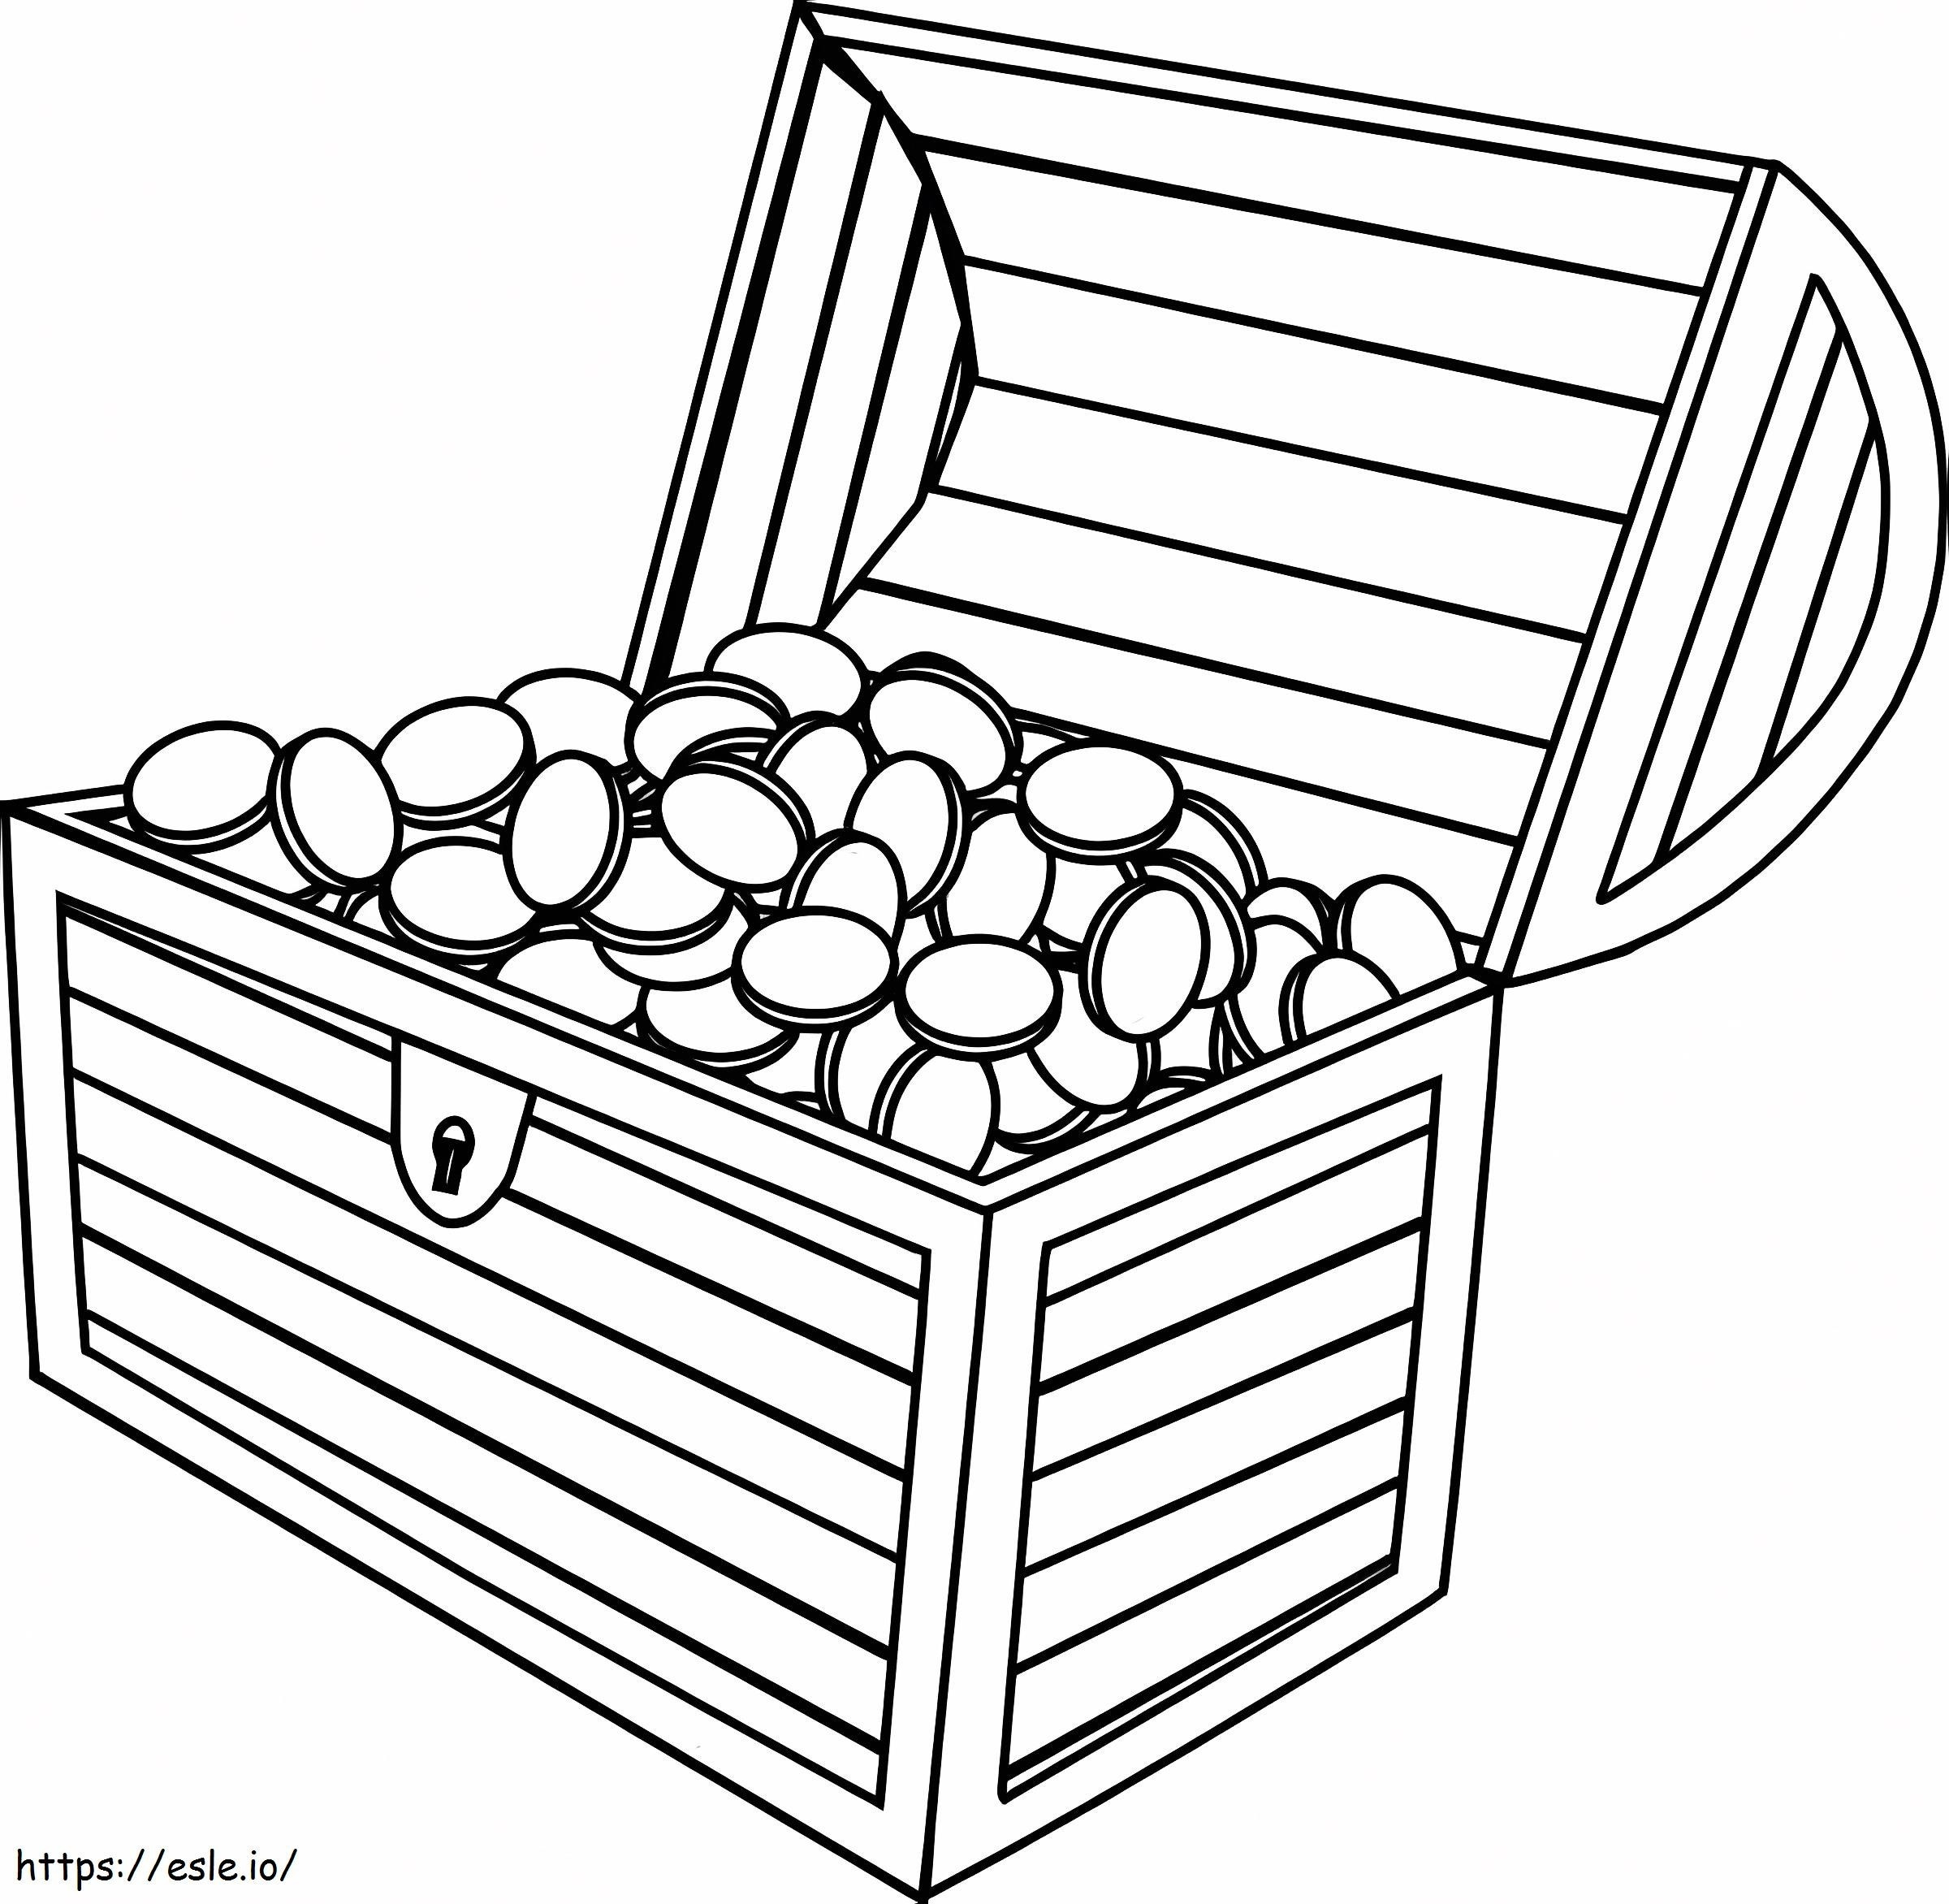 Easy Treasure Chest coloring page